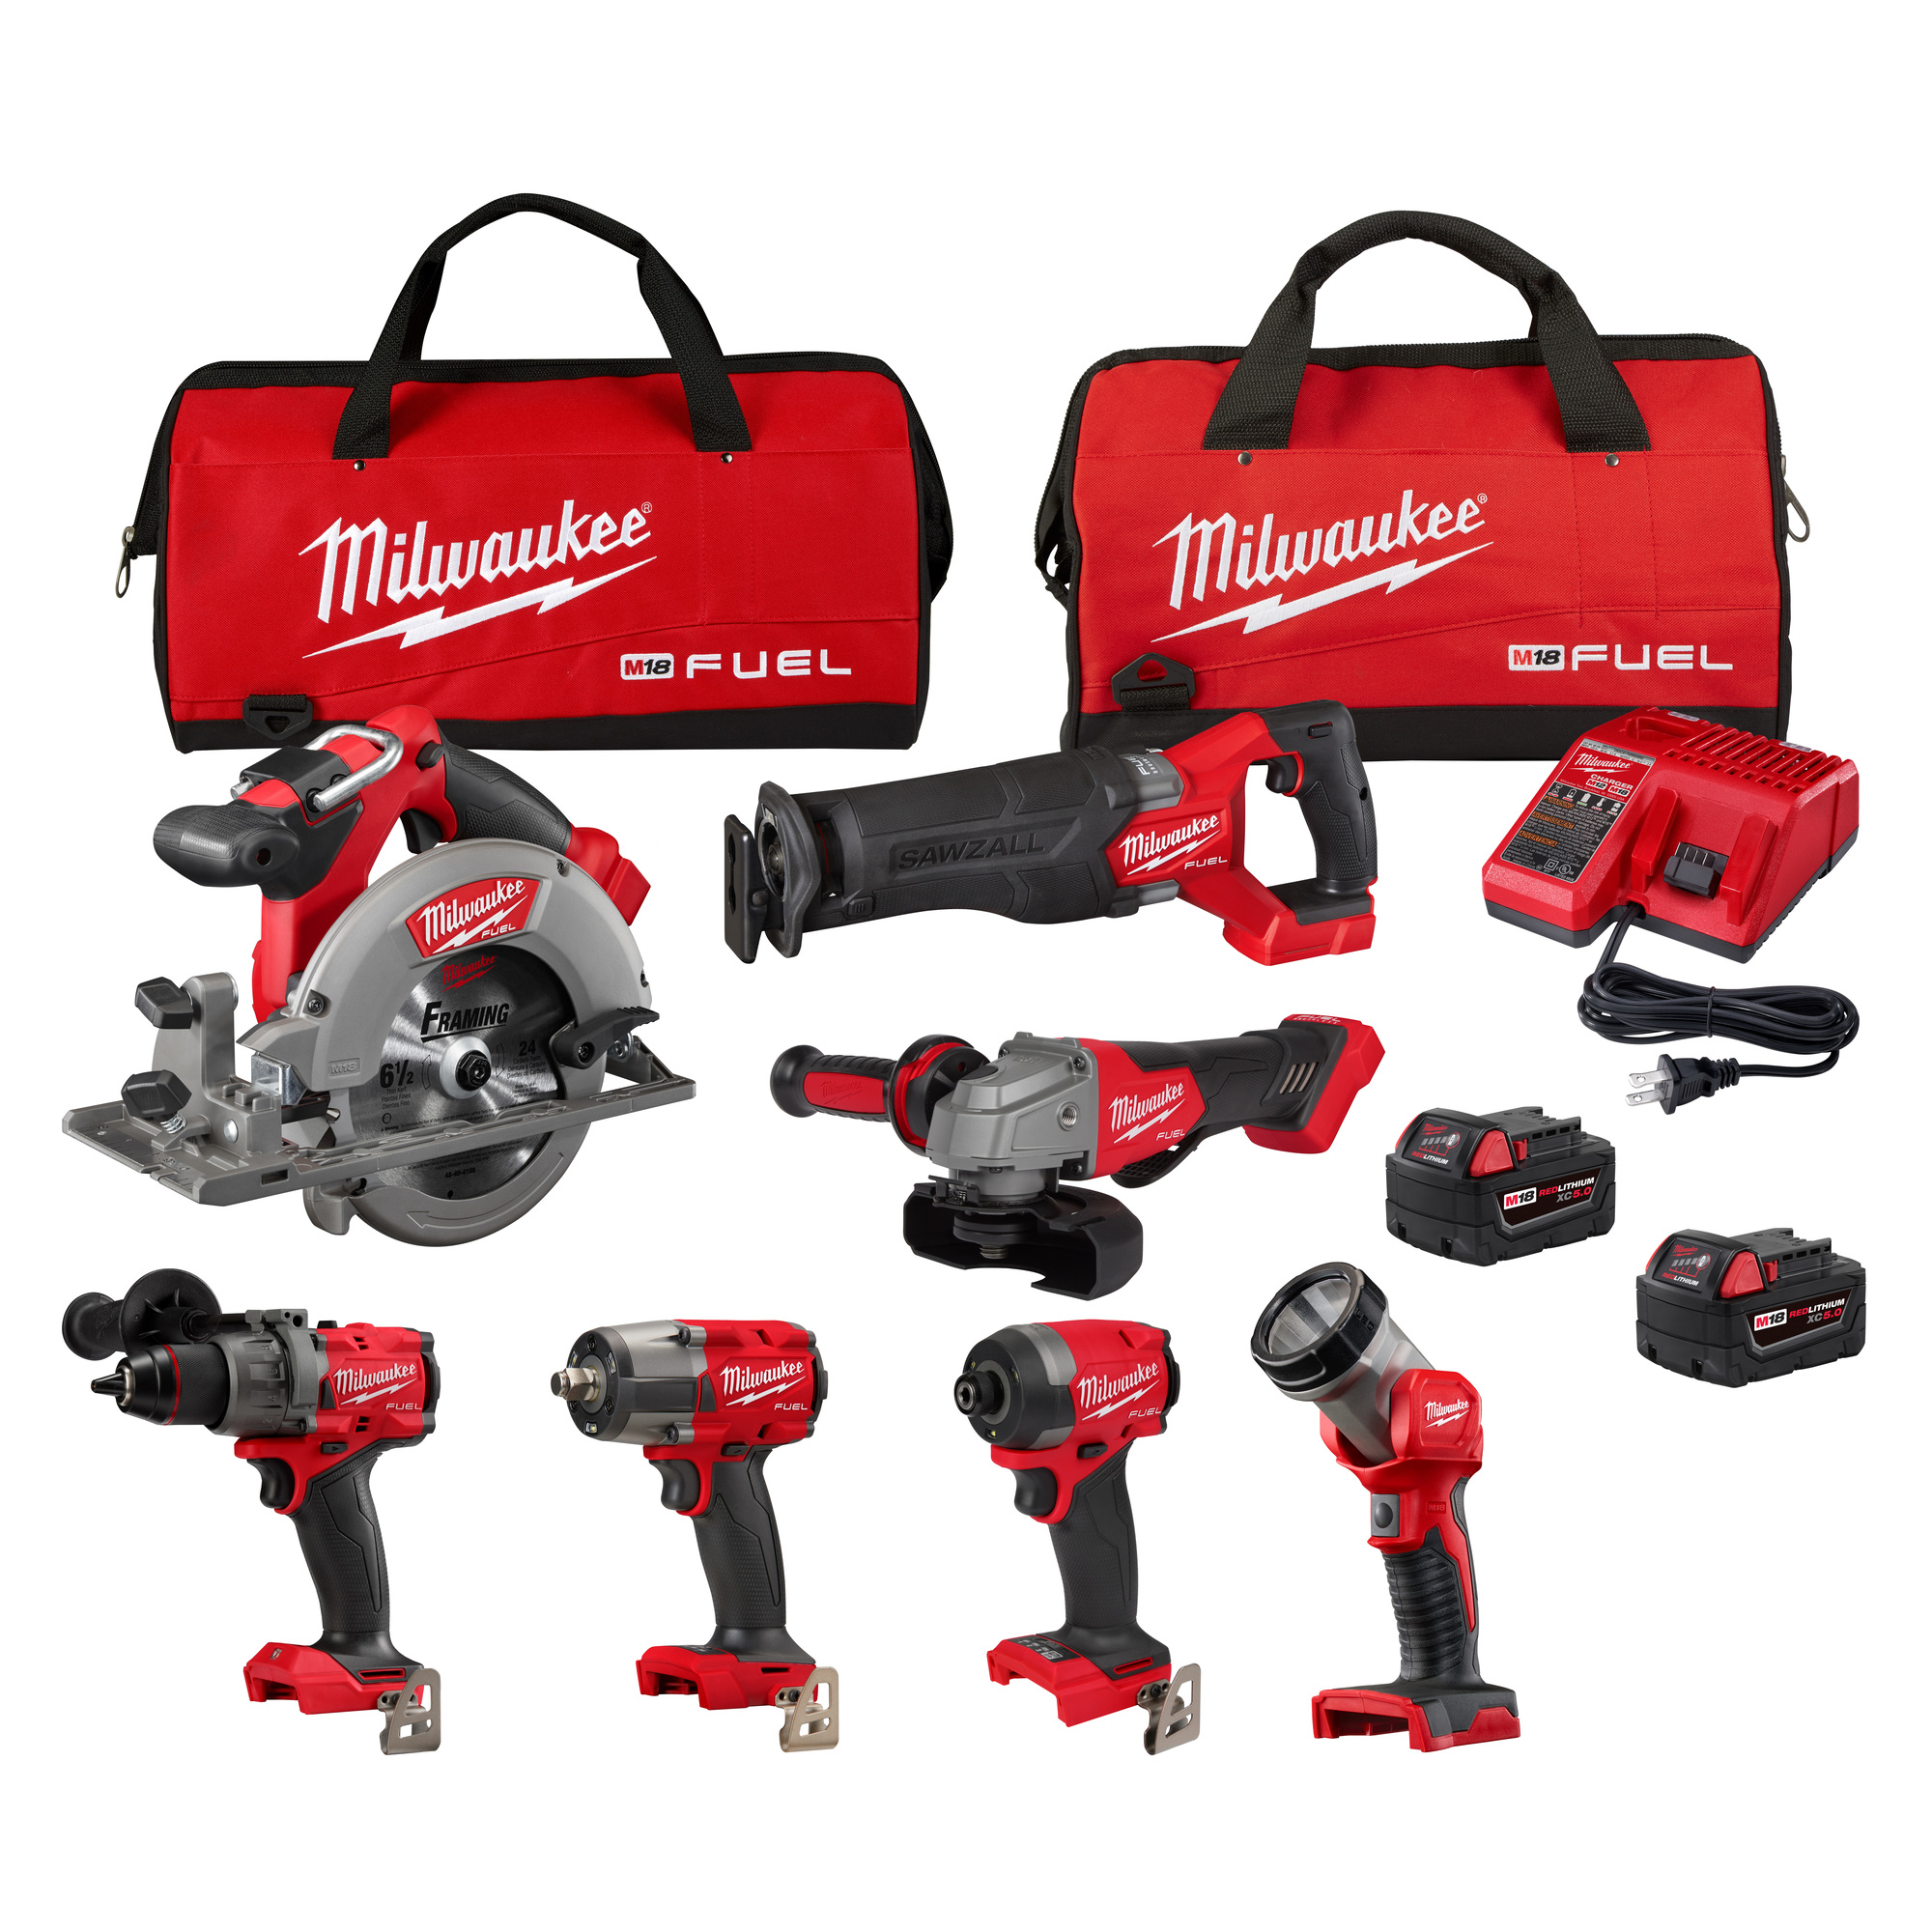 M18 FUEL 7-Tool Combo Kit, Chuck Size 1/4 in, Drive Size 1/4 in, Tools Included (qty.) 7, Model - Milwaukee 3697-27